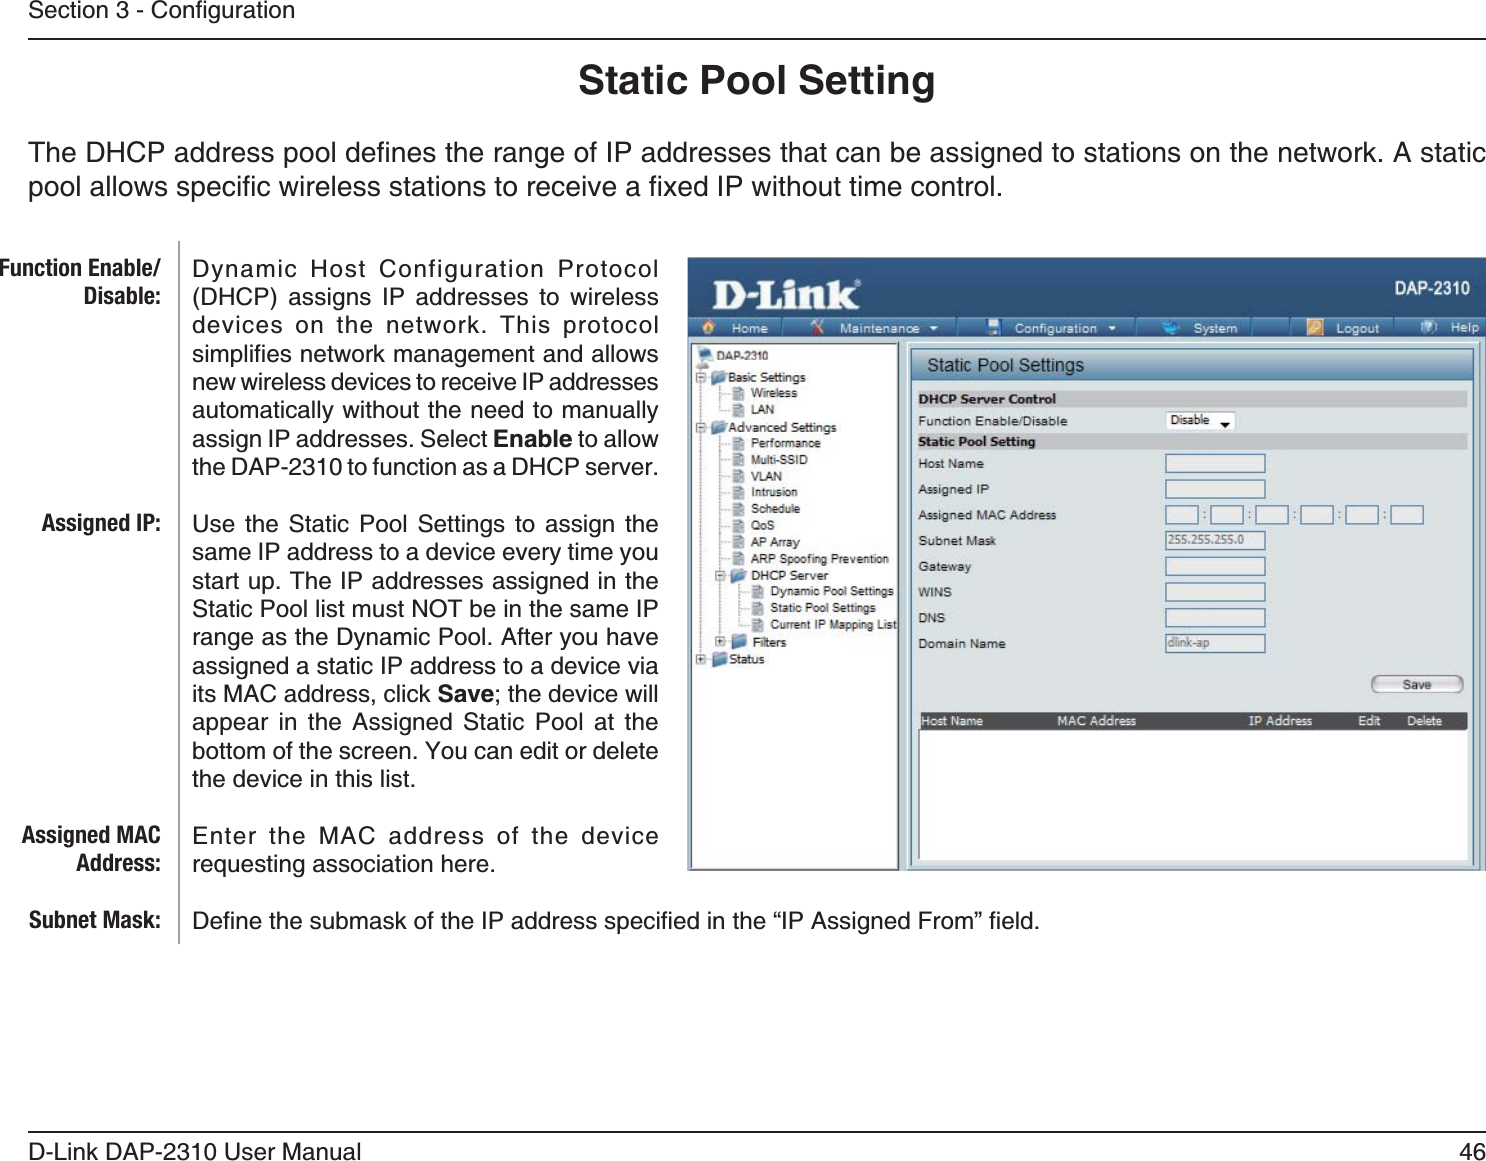 46D-Link DAP-2310 User ManualStatic Pool SettingDynamic Host Configuration Protocol      devices on the network. This protocol new wireless devices to receive IP addresses automatically without the need to manually assign IP addresses. Select Enable to allow the DAP-2310 to function as a DHCP server. Use the Static Pool Settings to assign the same IP address to a device every time you start up. The IP addresses assigned in the Static Pool list must NOT be in the same IP range as the Dynamic Pool. After you have assigned a static IP address to a device via its MAC address, click Save; the device will appear in the Assigned Static Pool at the the device in this list. Enter the MAC address of the device requesting association here.Function Enable/Disable:Assigned IP:Assigned MAC Address:Subnet Mask: